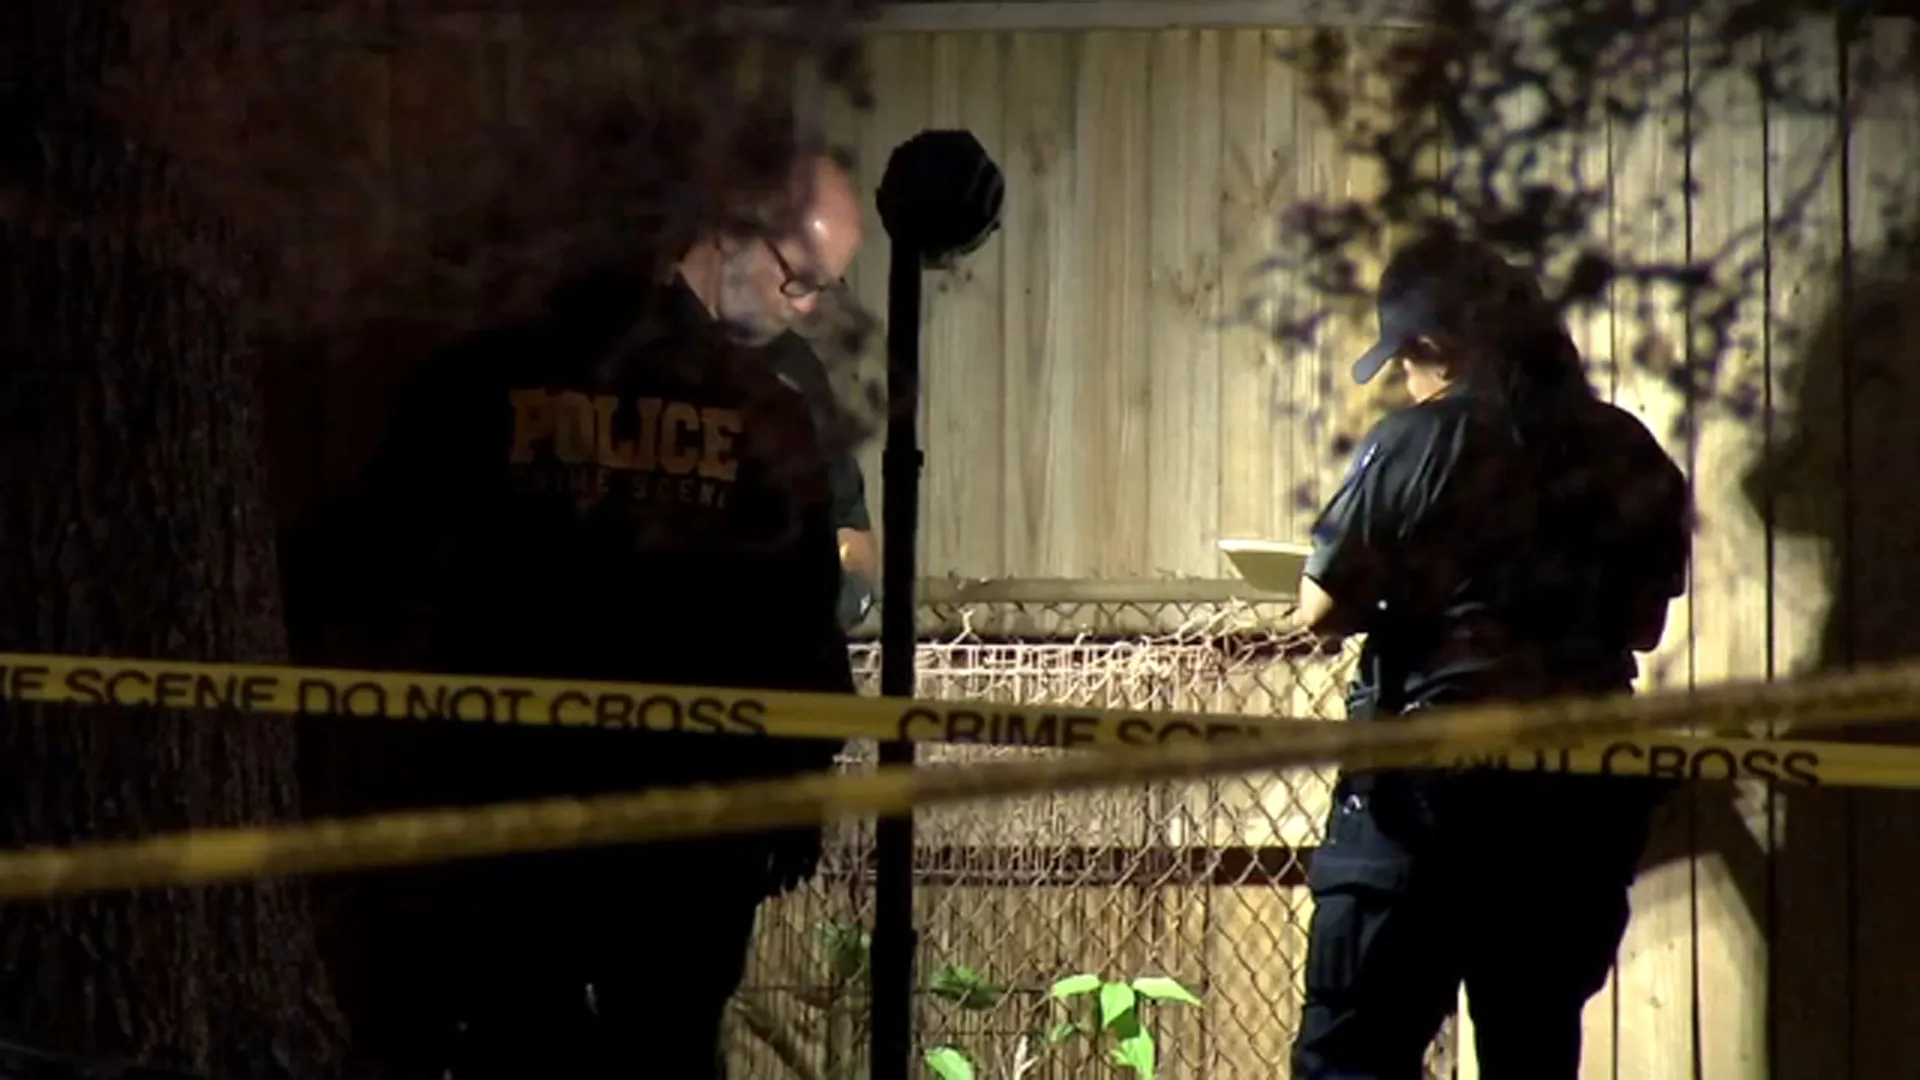 Woman shot while sleeping in her Texas City home